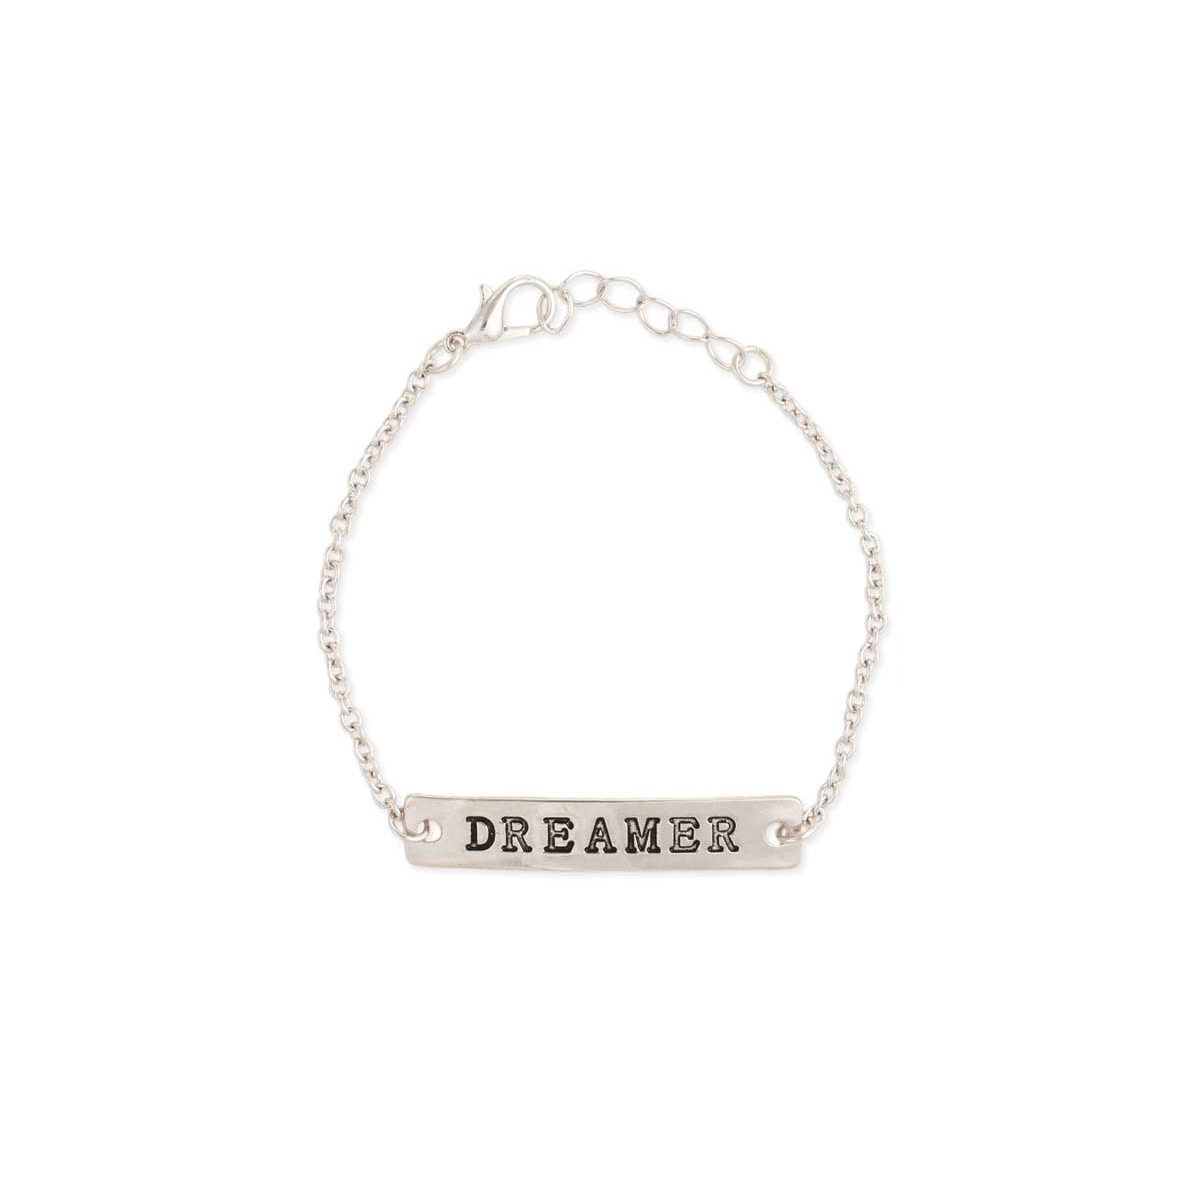 Buy Hand Stamped Dreamer Cuff Bracelet Online in India - Etsy